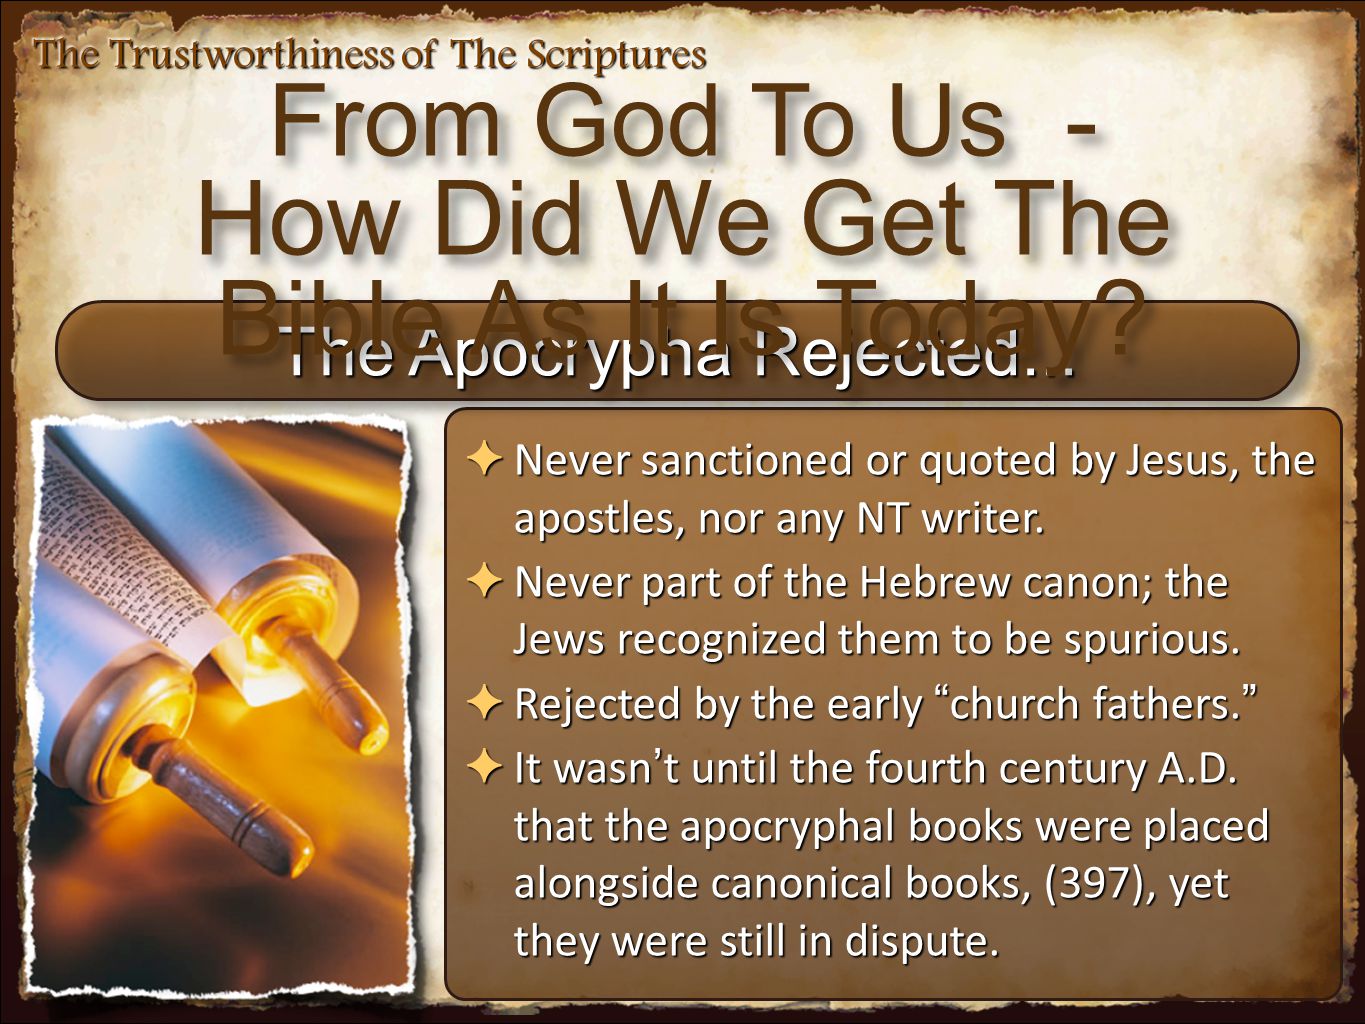 The Apocrypha Rejected...